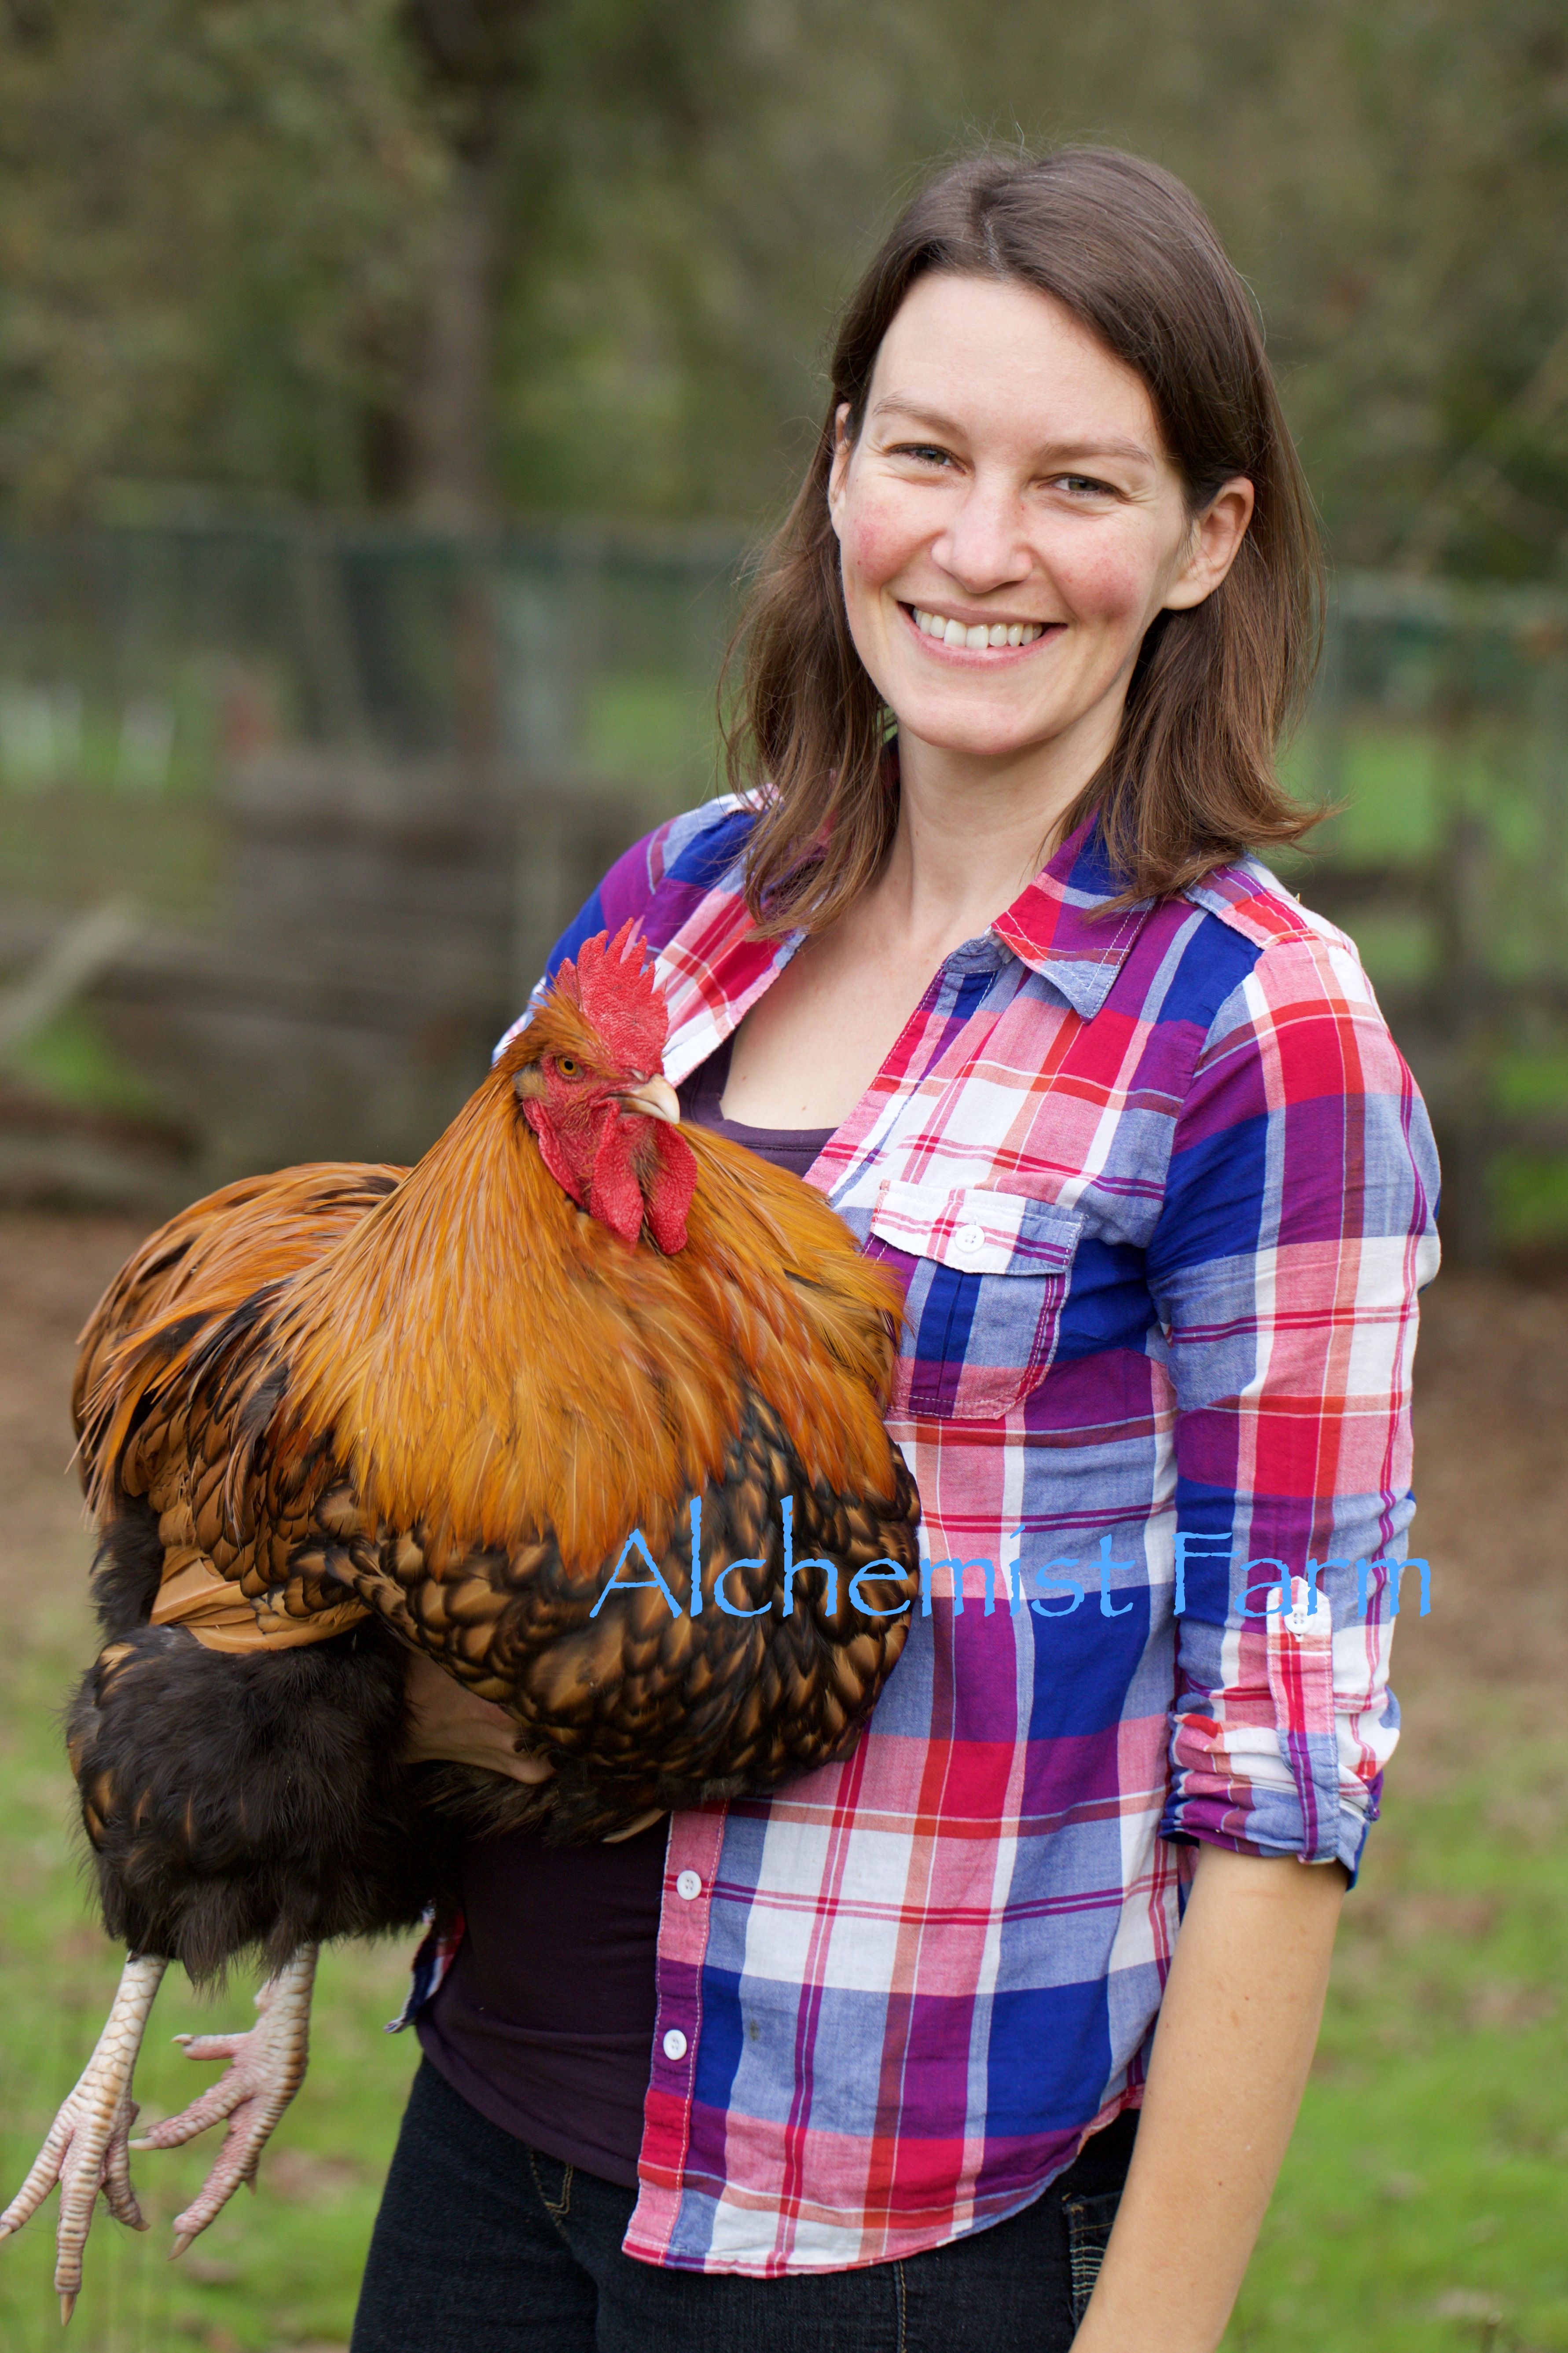 Want To Know All About Backyard Chicken Keeping? We Have You Covered!